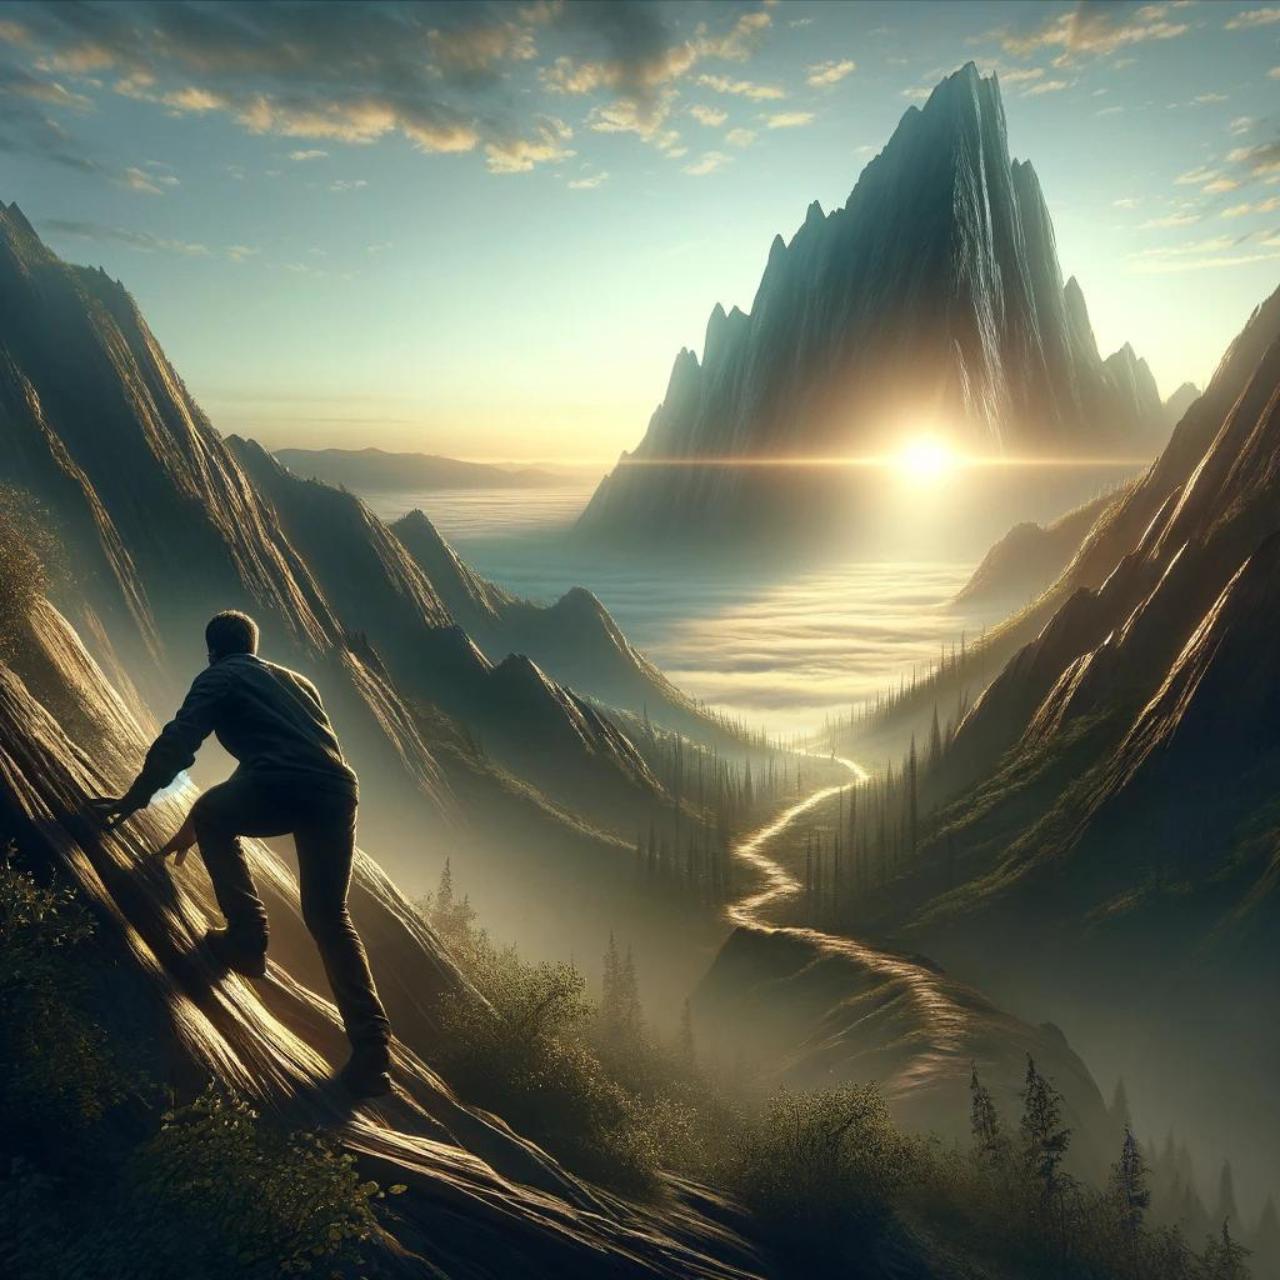 A person climbing a mountain, facing a challenging path with determination and strength. Set against a backdrop that symbolizes hope and progress, the individual's effort and resolve are clearly conveyed, embodying the concept of 'keep going when things are tough' within a natural and beautiful setting.